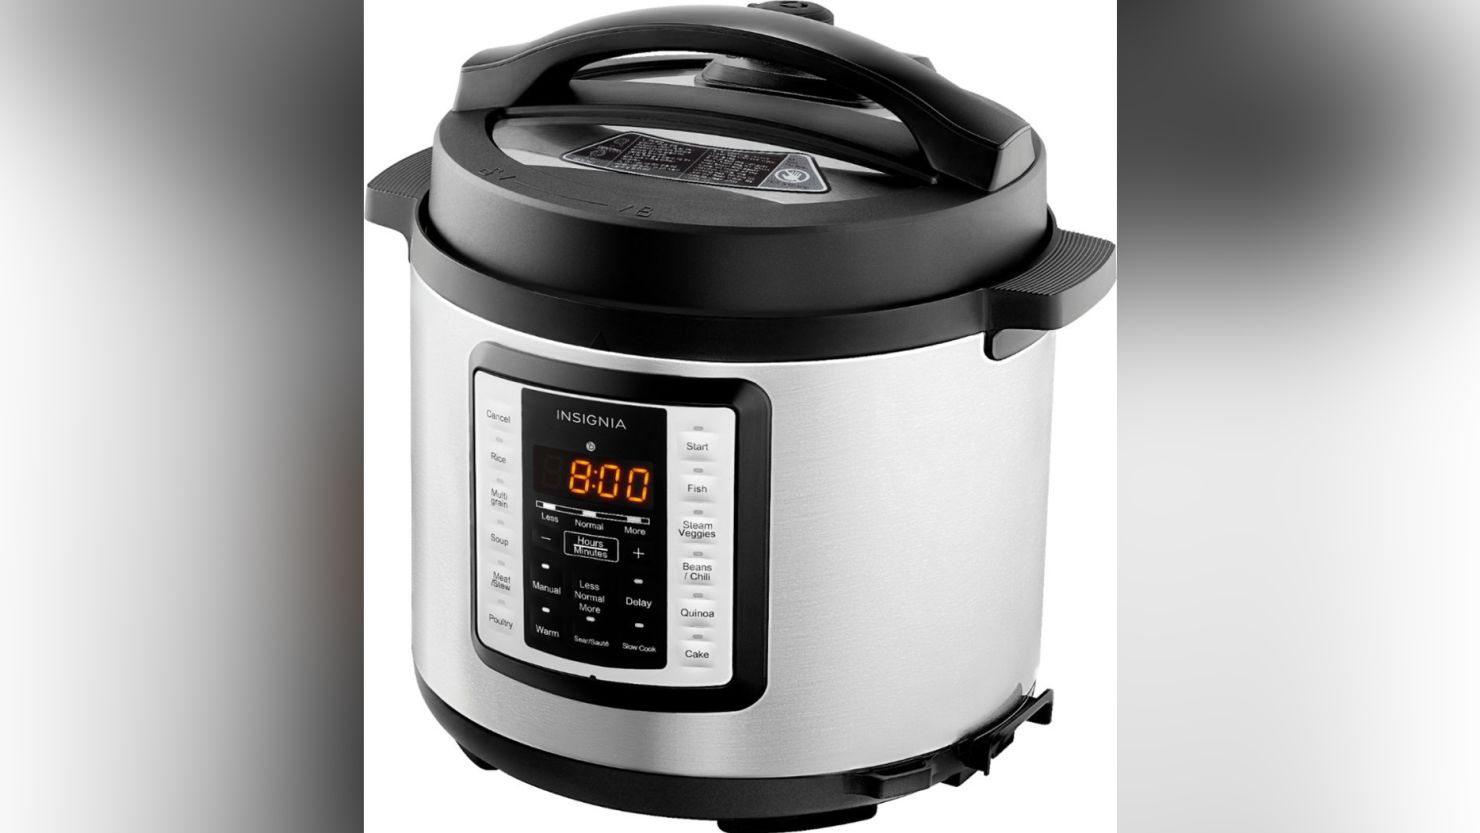 Why a pressure cooker can save both time and money, Food